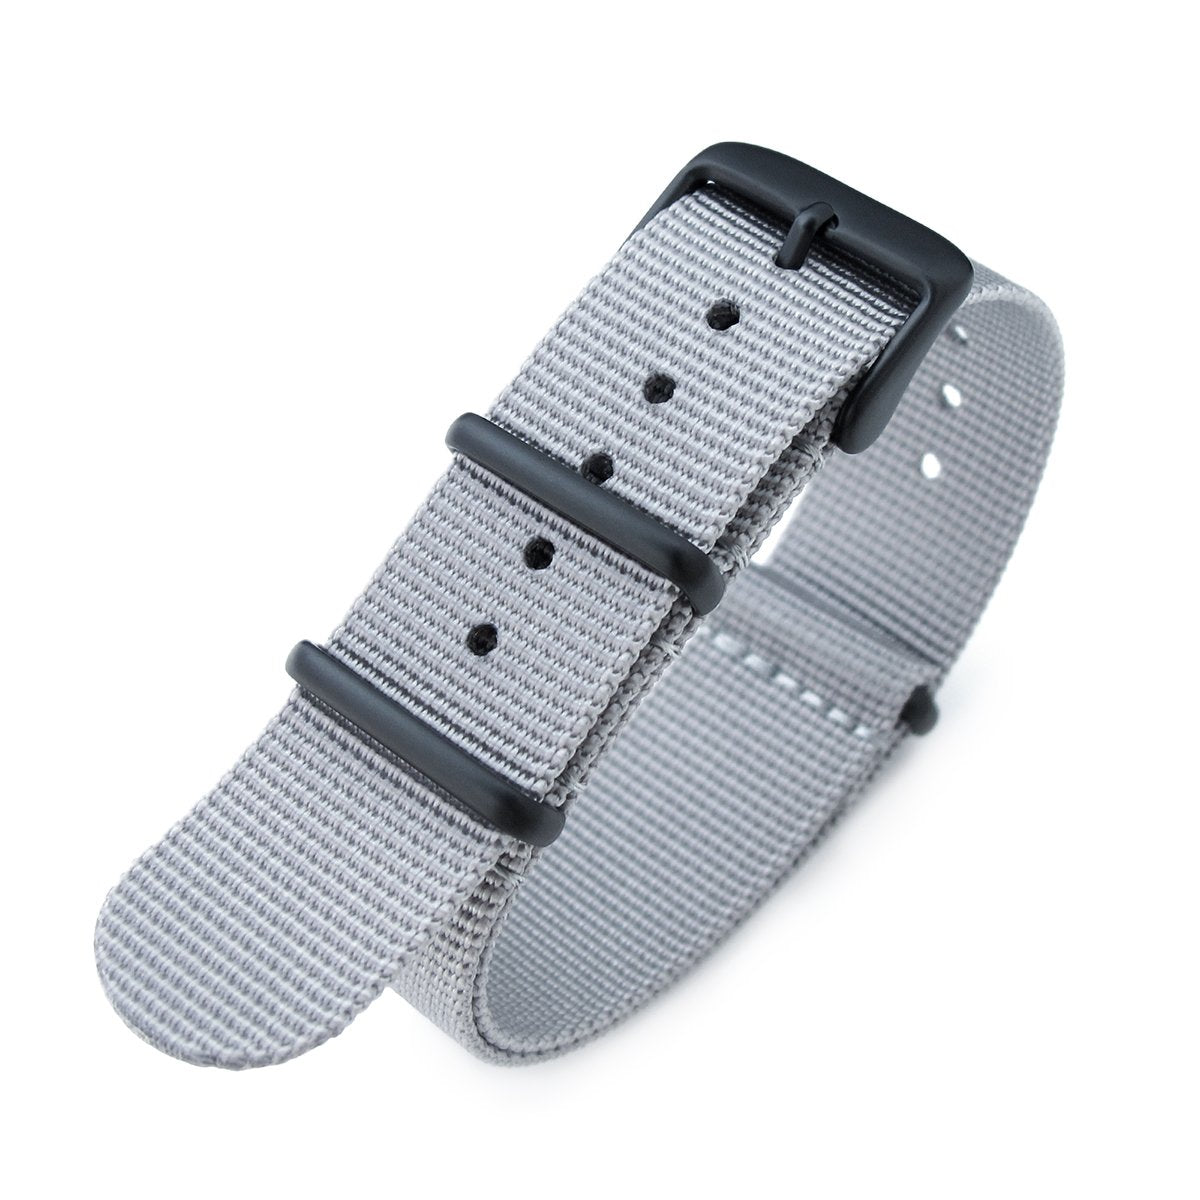 NATO 20mm G10 Military Watch Band Nylon Strap Military Grey PVD Black 260mm Strapcode Watch Bands